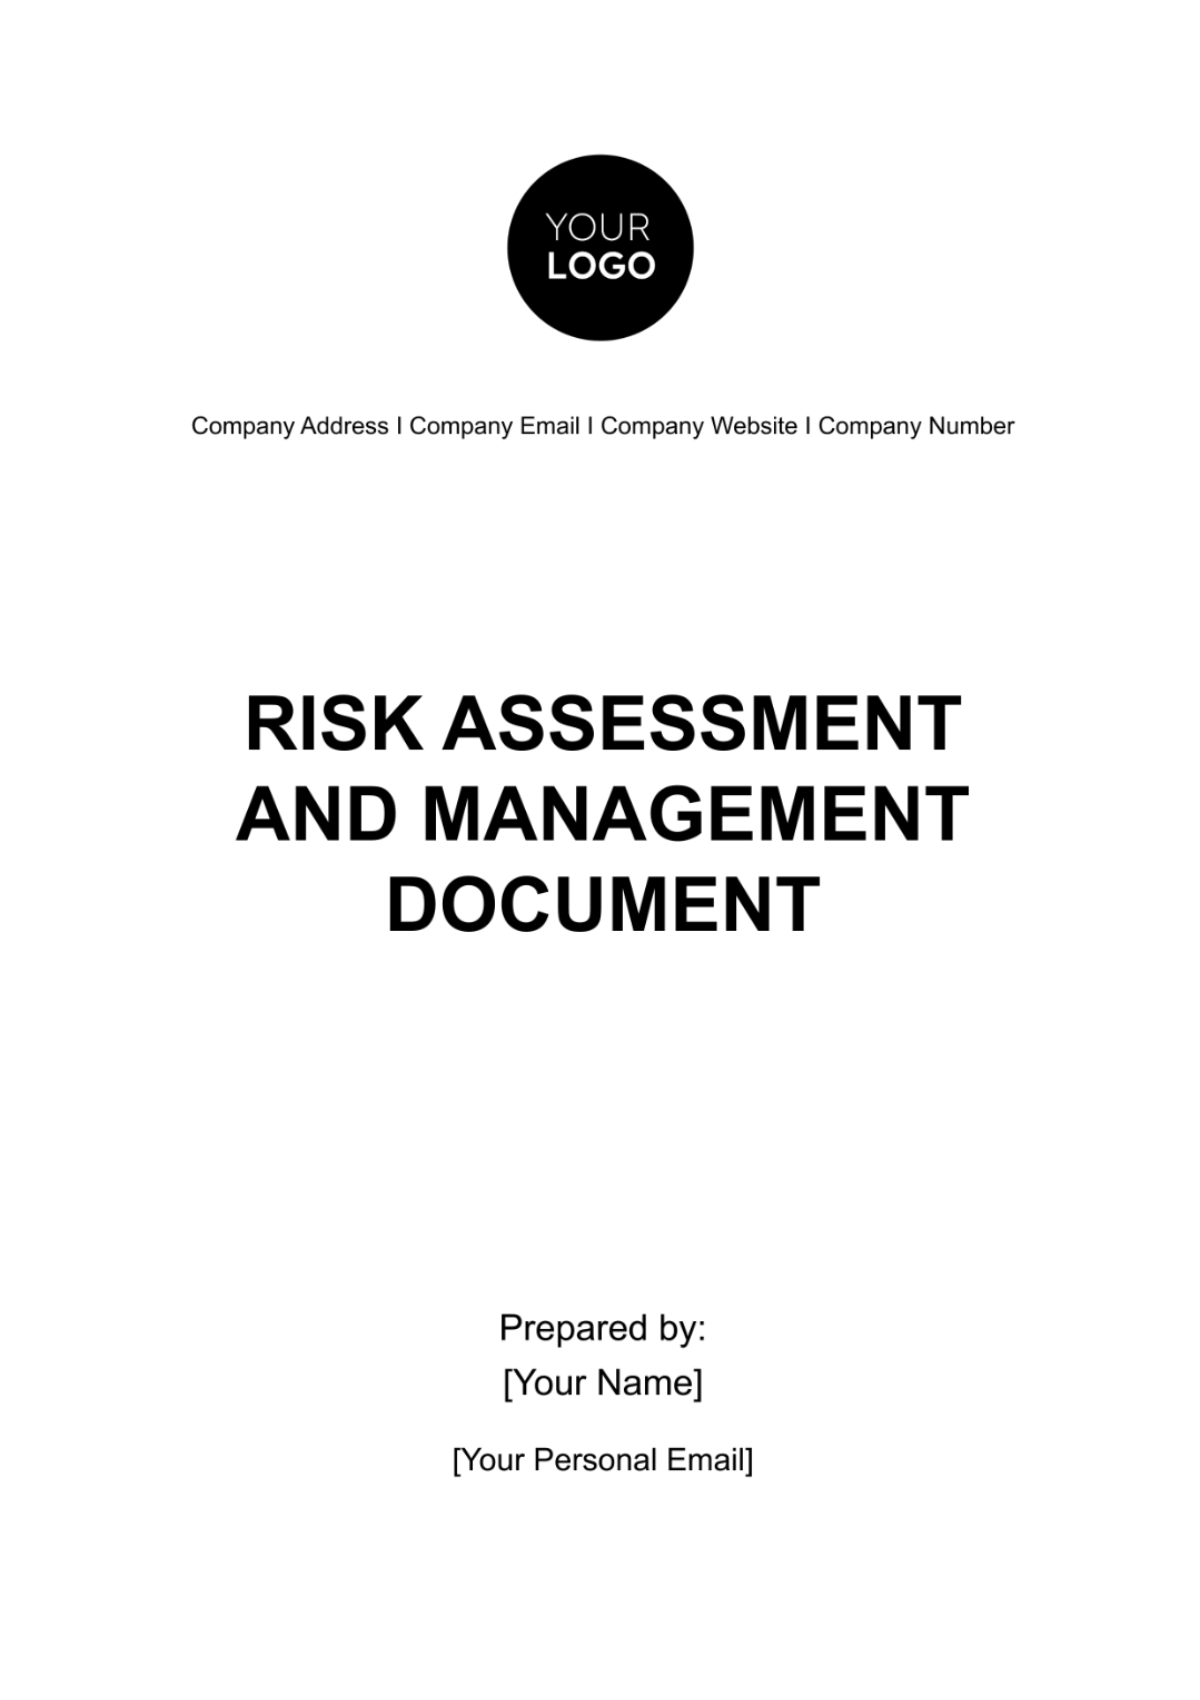 Risk Assessment and Management Document HR Template